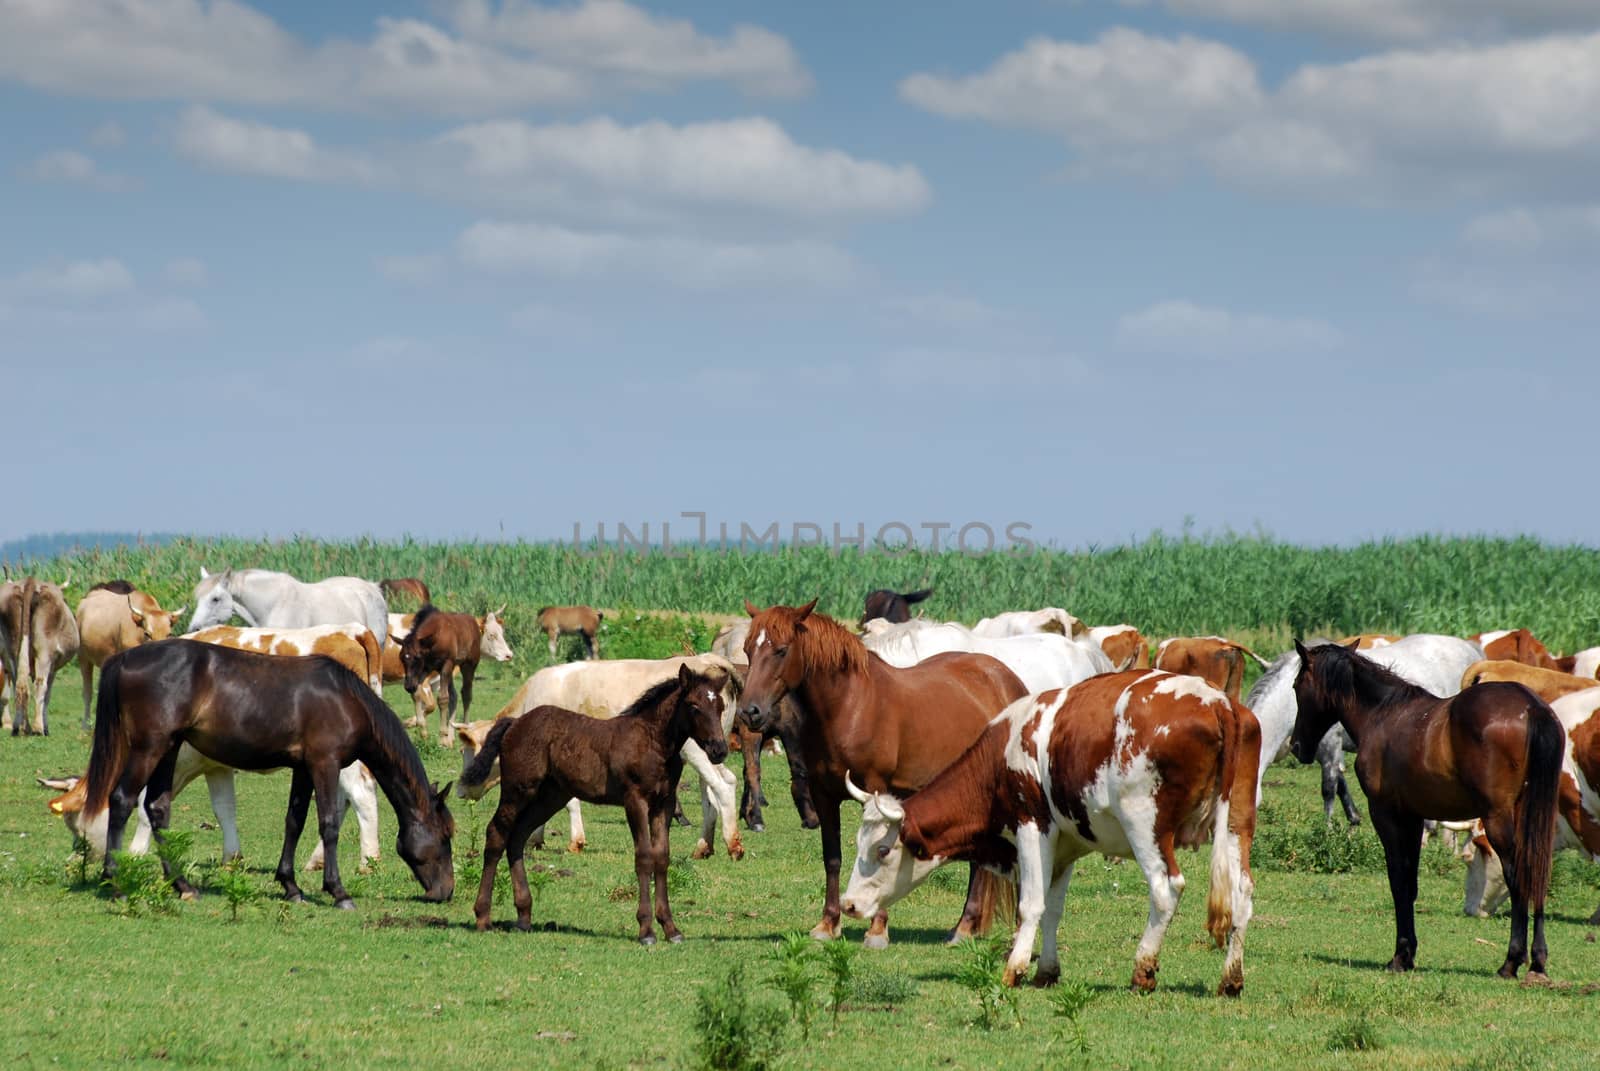 cows and horses on pasture by goce